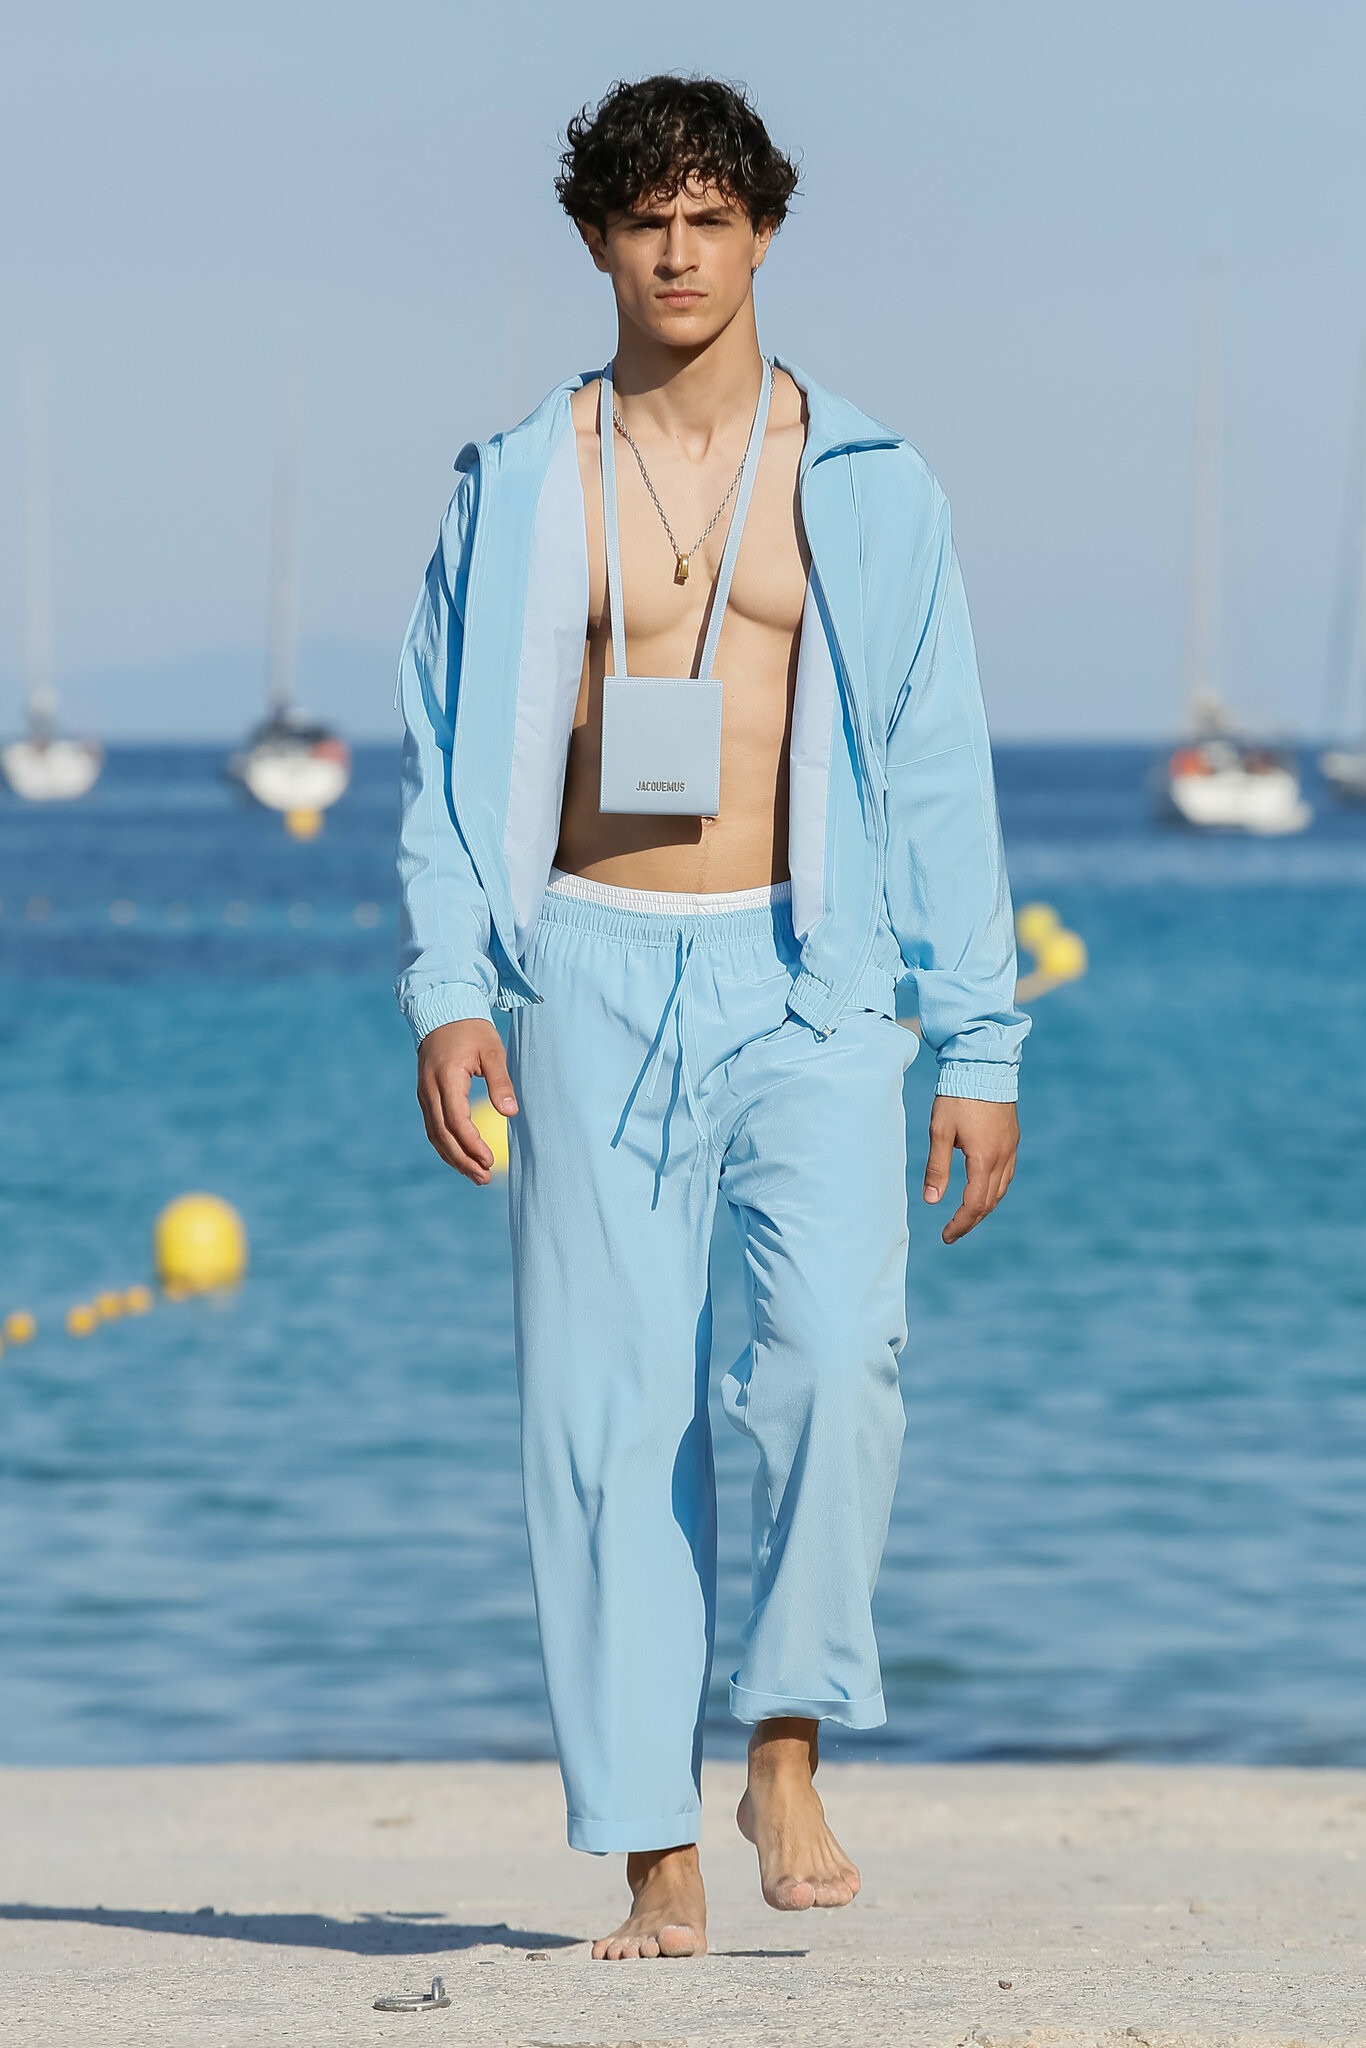 Jacquemus: The brand’s styles are minimalist, asymmetrical, surrealist and effortless, Spring 2019. 1370x2050 HD Background.